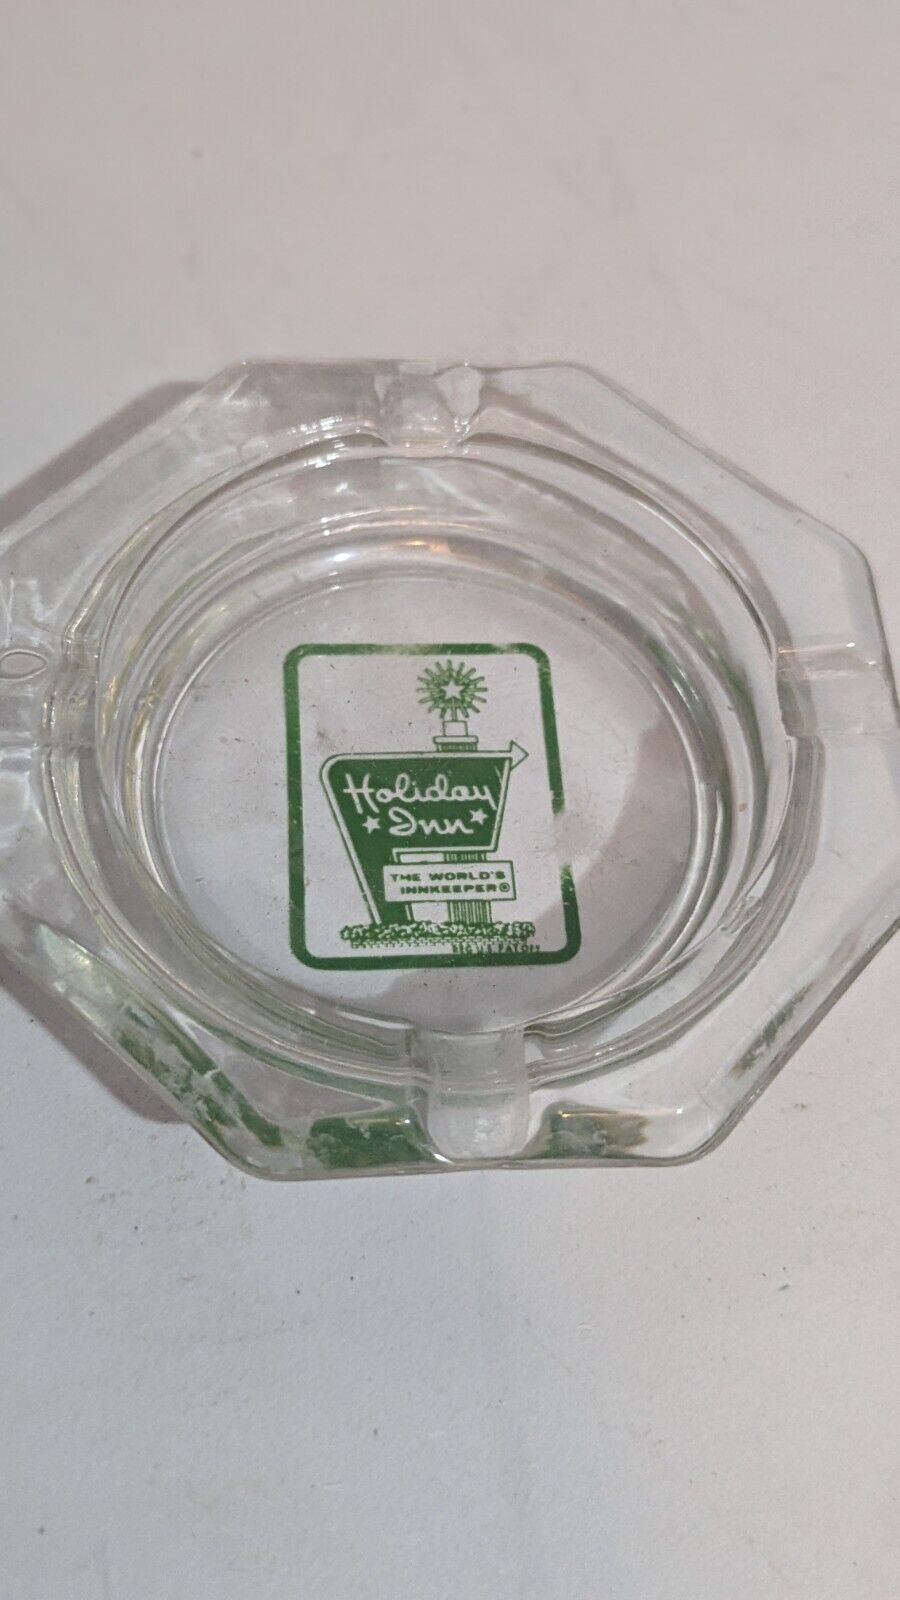 Vintage Clear Glass Ashtray~Holiday Inn \'The worlds Innkeeper\' Advertising 